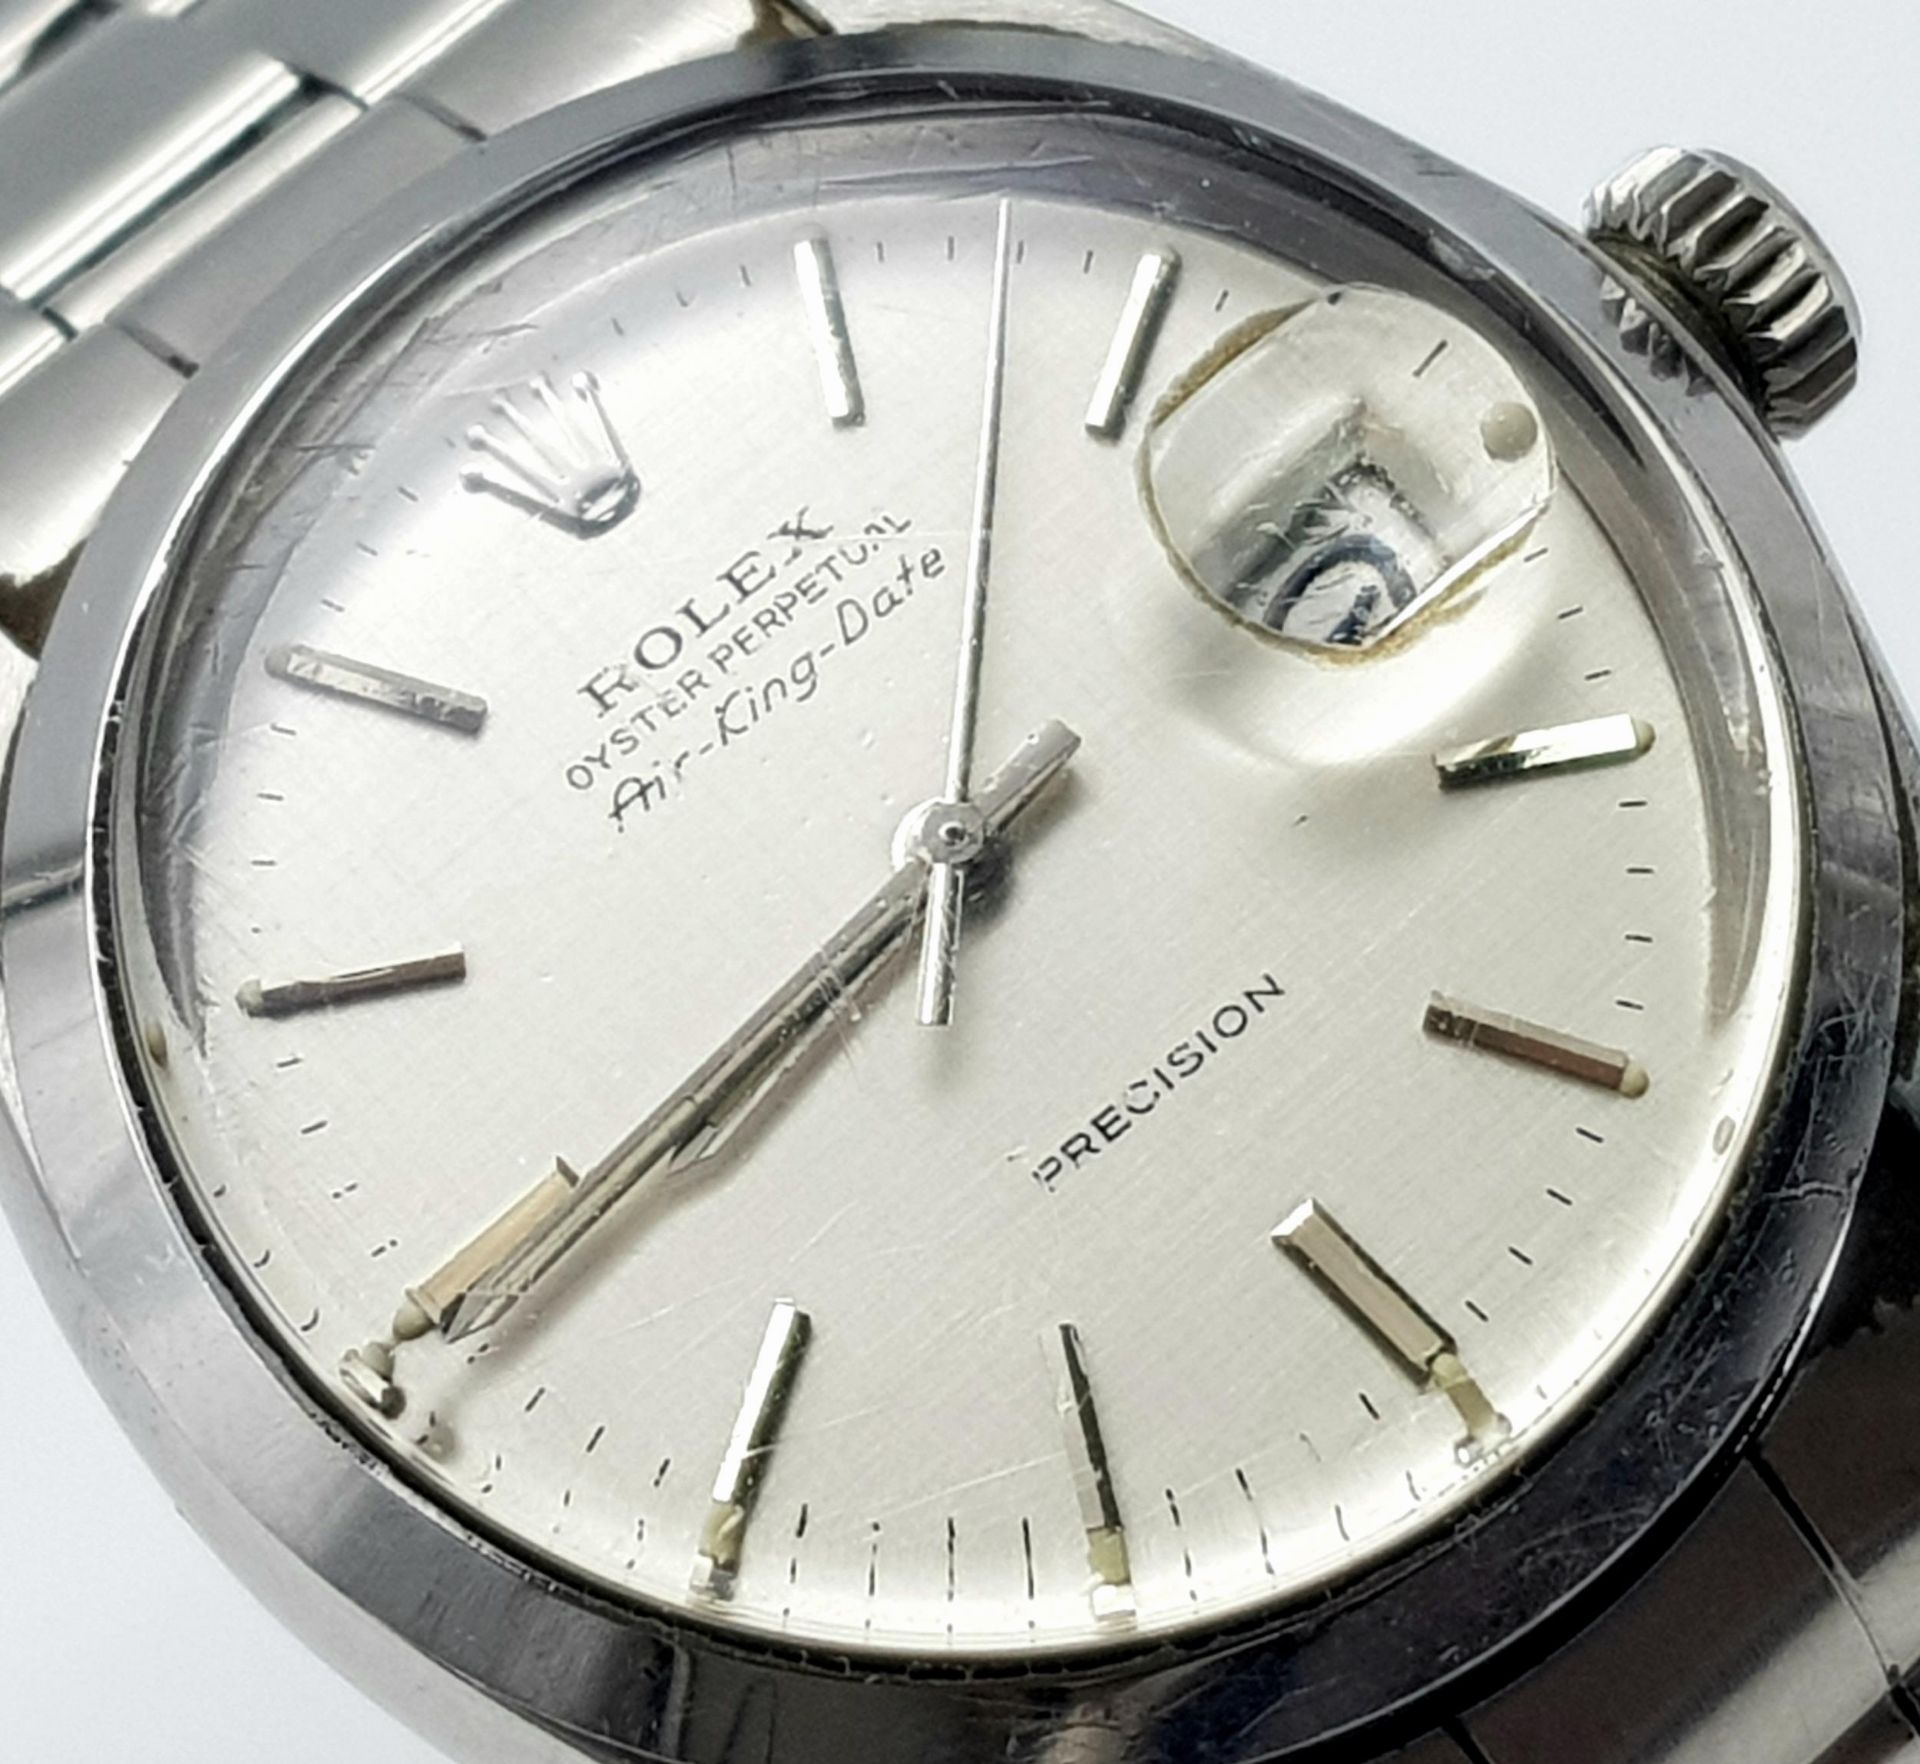 A Vintage Rolex Air King Mid Size Automatic Watch. Stainless steel bracelet and case - 35mm. - Bild 3 aus 8